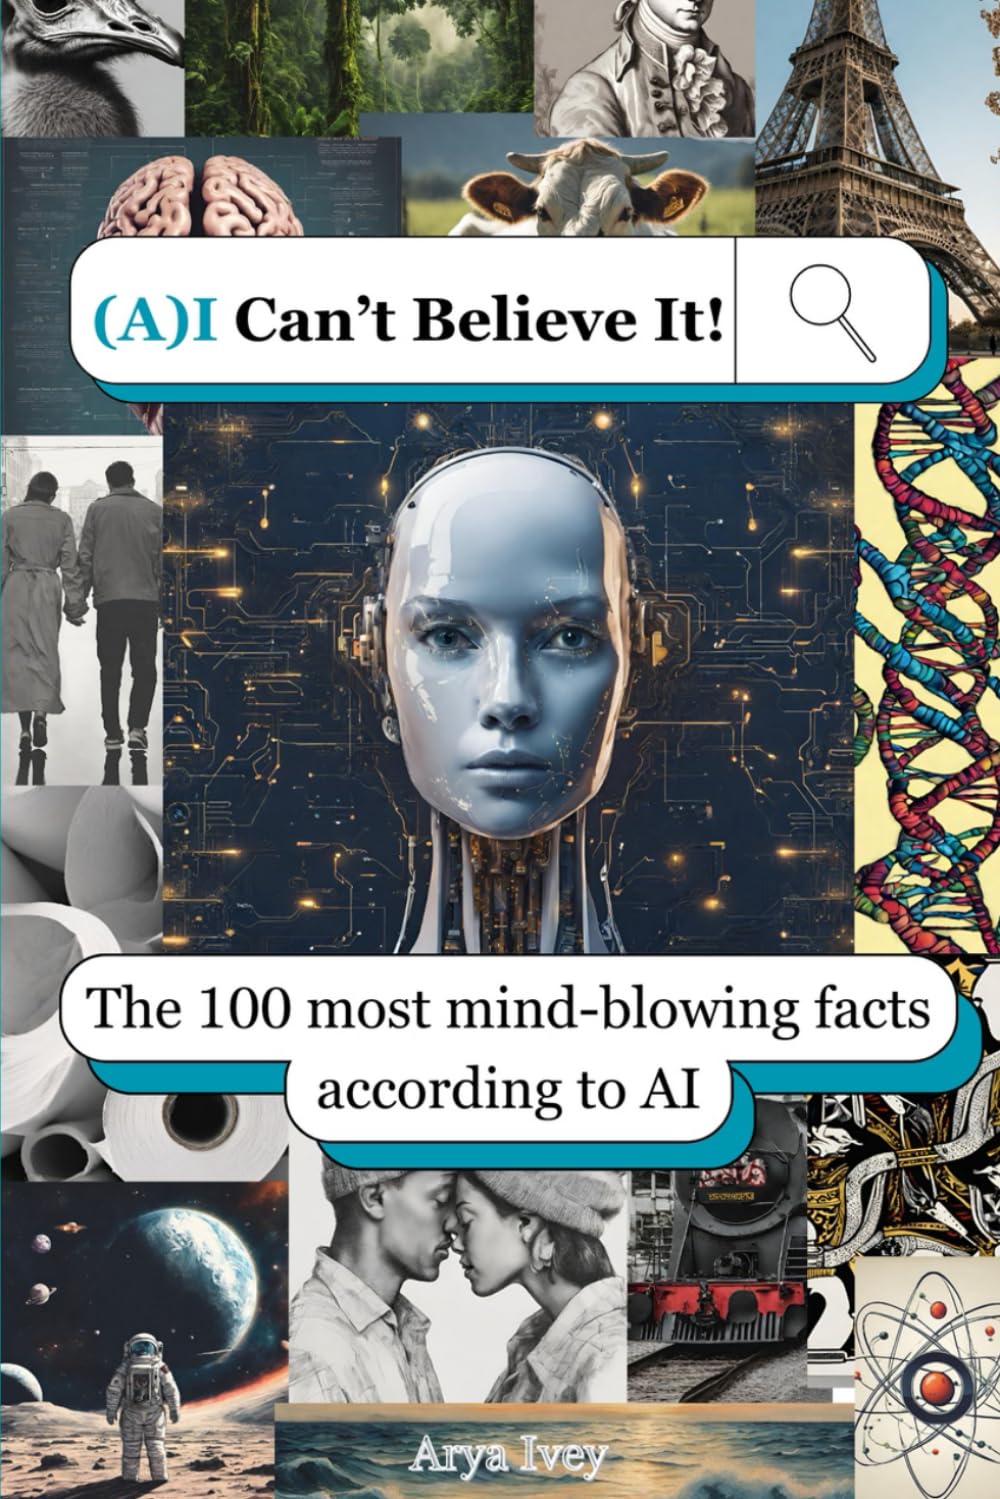 (A)I Can't Believe It: The 100 most mind-blowing facts according to AI